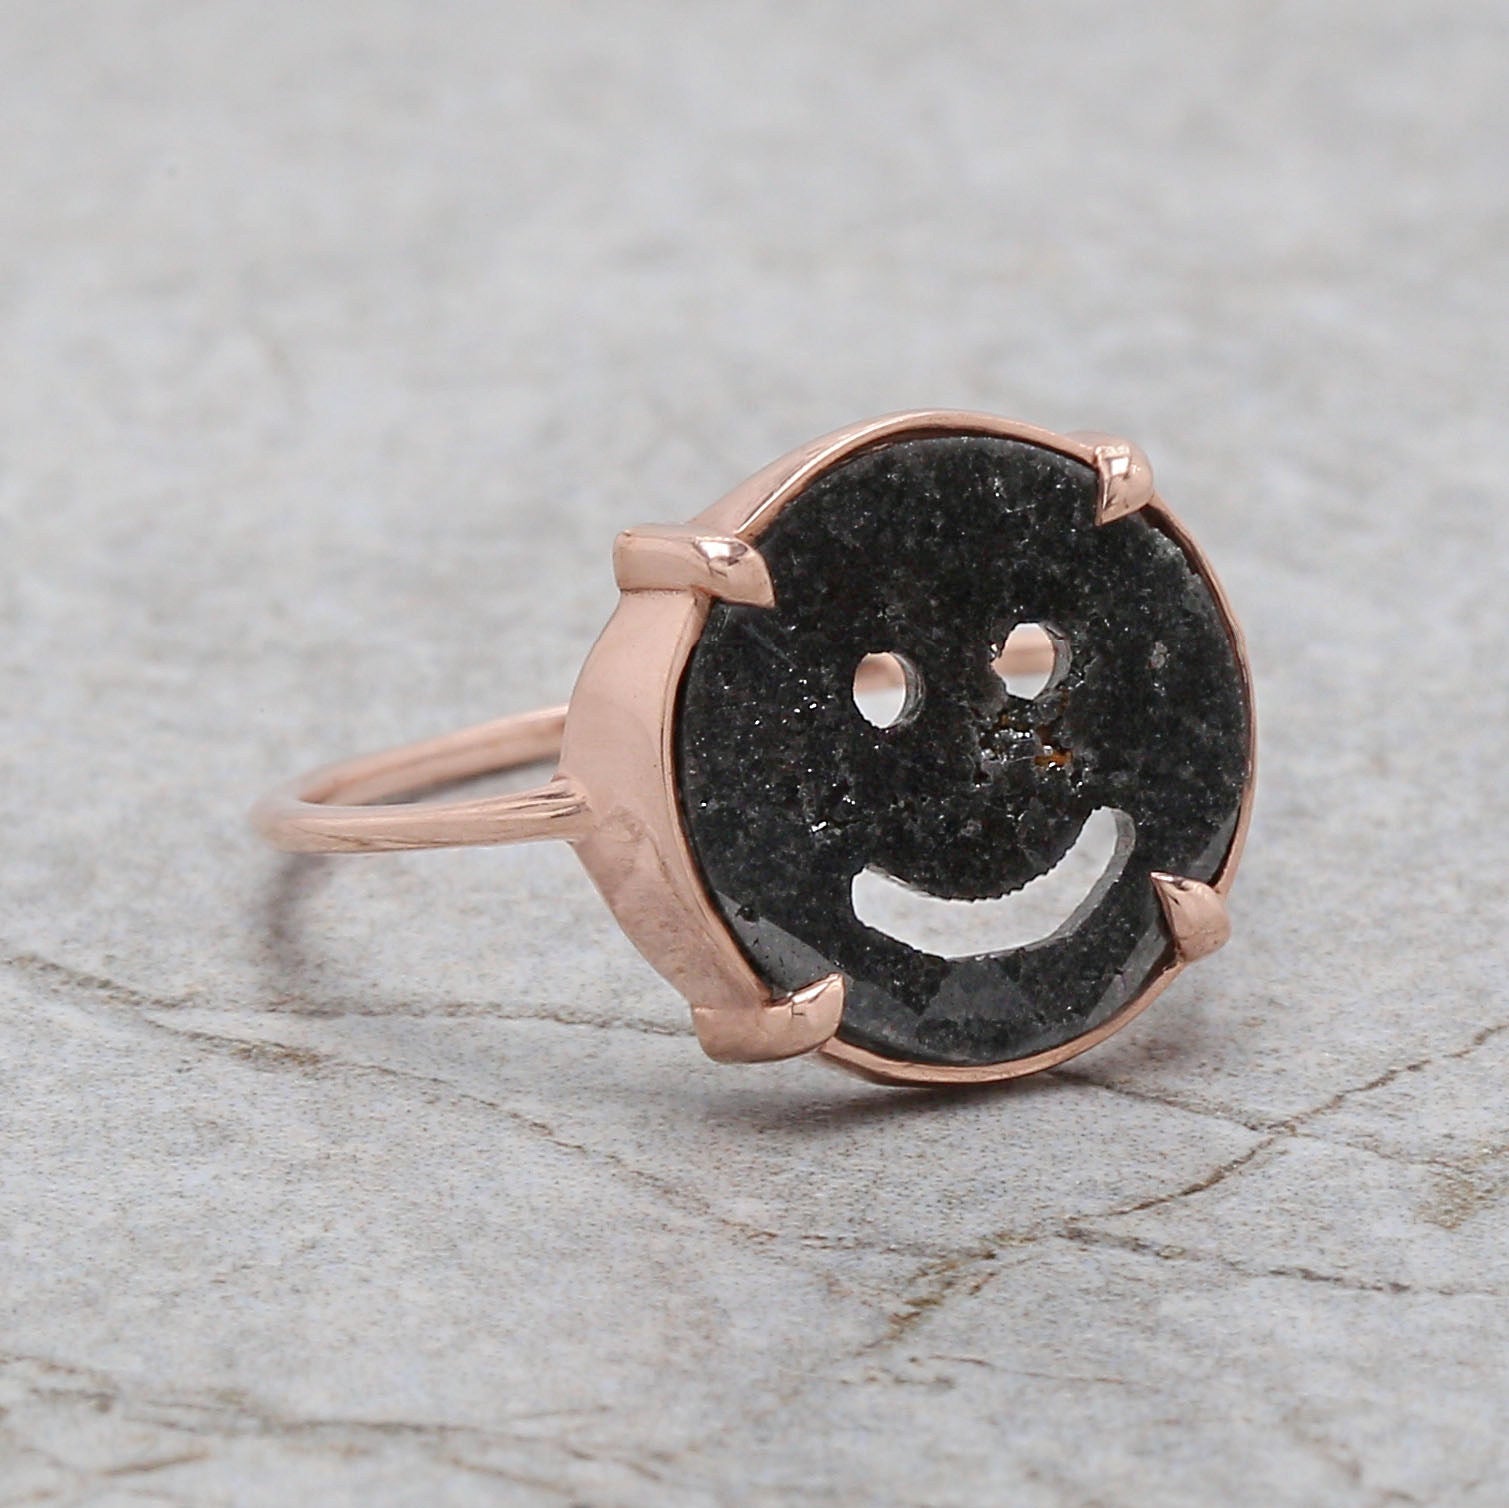 Smiley Face Black Color Diamond Ring Engagement Wedding Gift Ring14K Solid Rose White Yellow Gold Ring 1.41 CT KDK2331